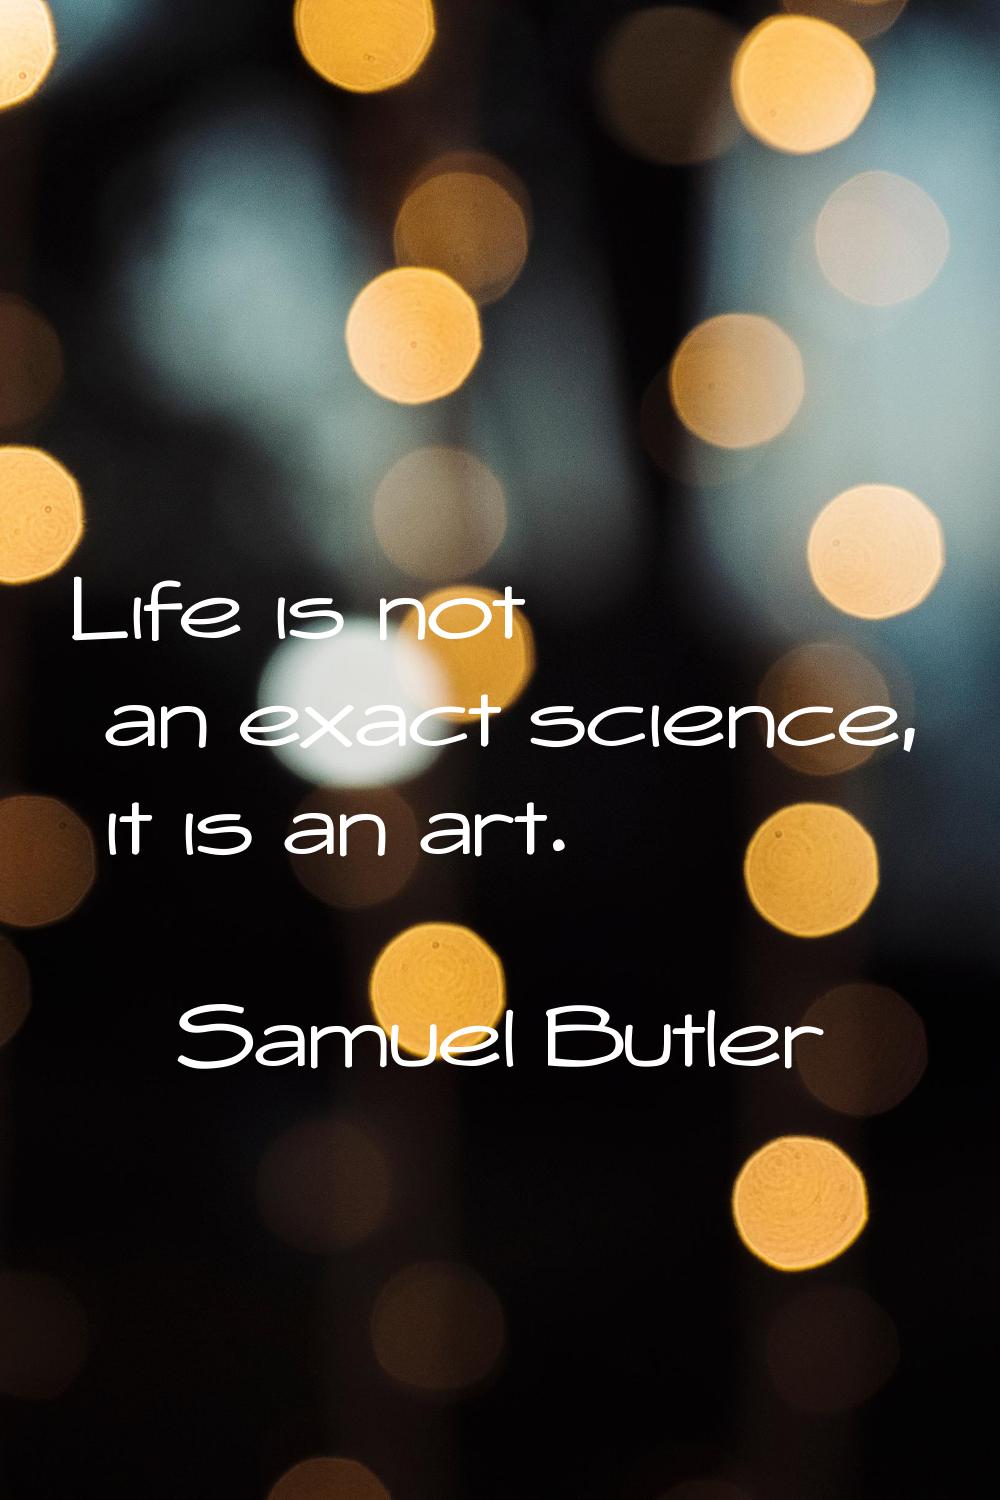 Life is not an exact science, it is an art.